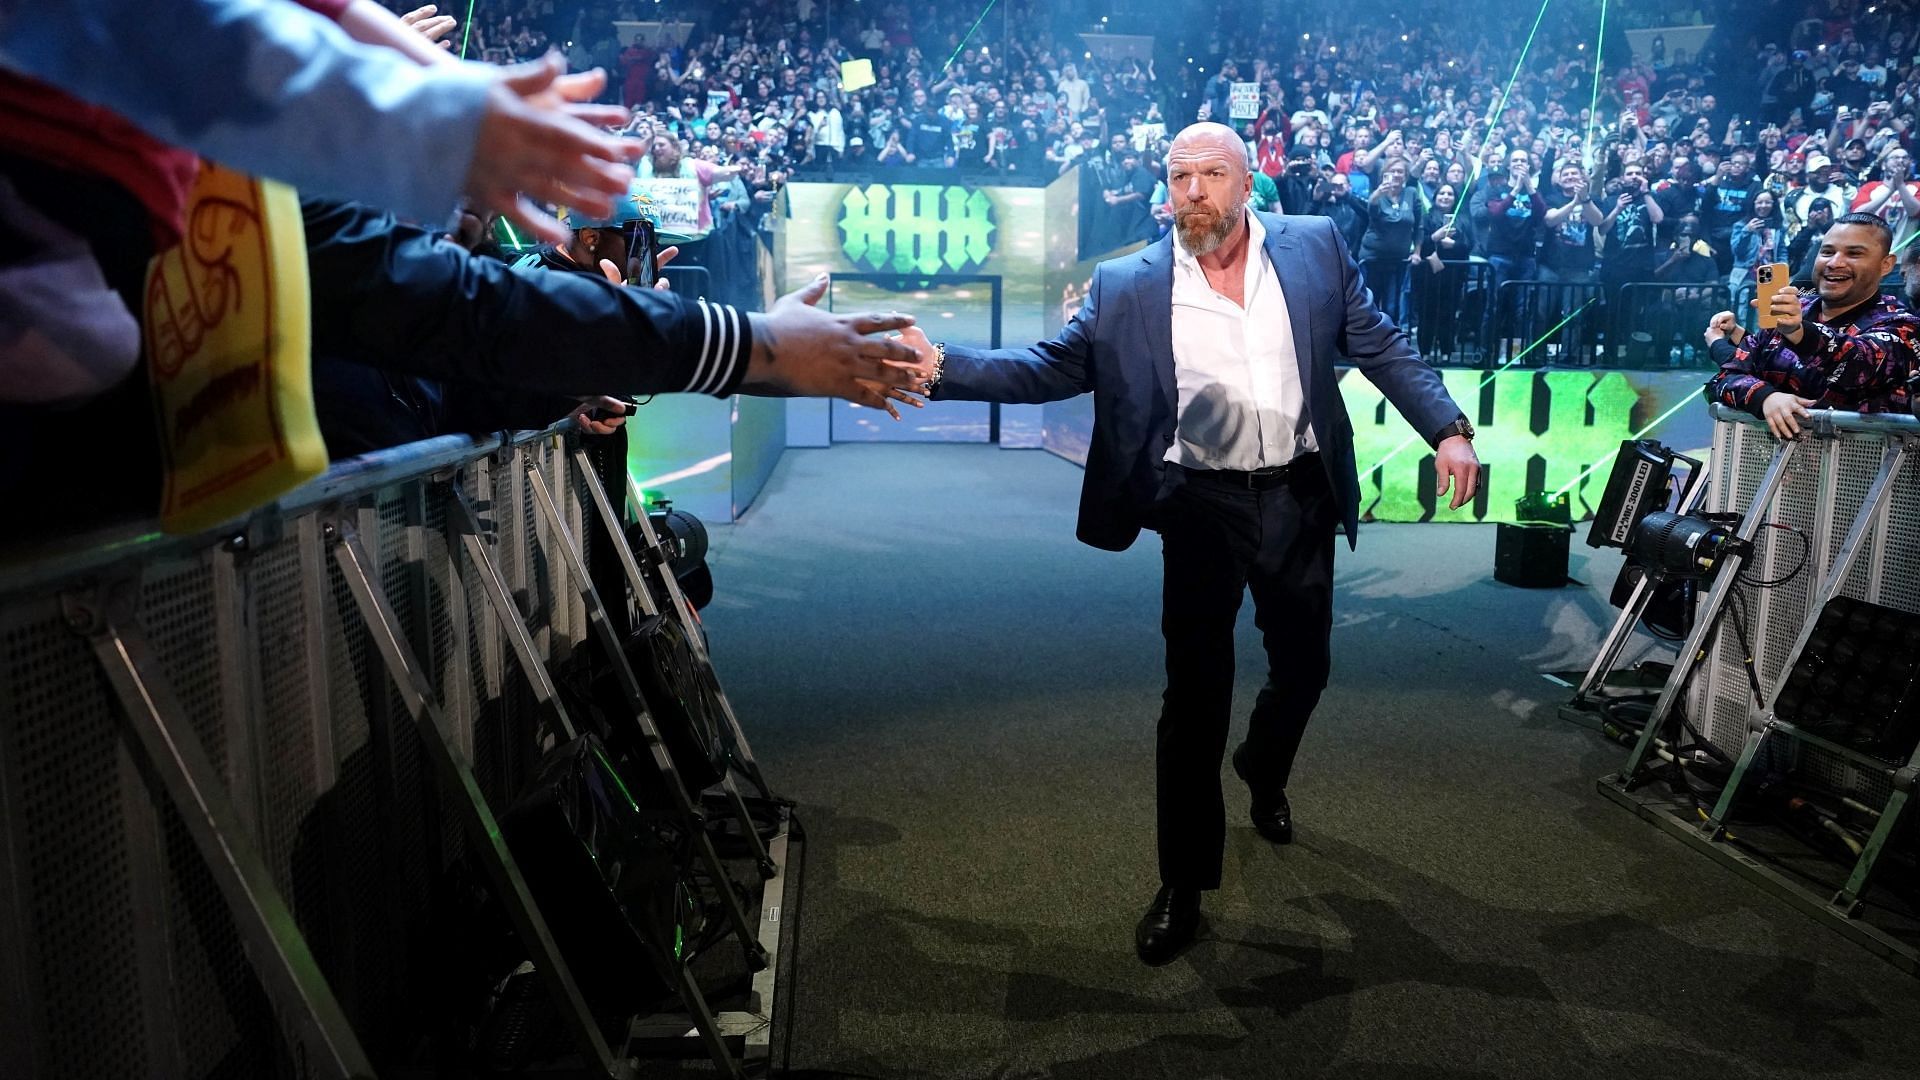 Triple H greets the WWE Universe to kick off RAW